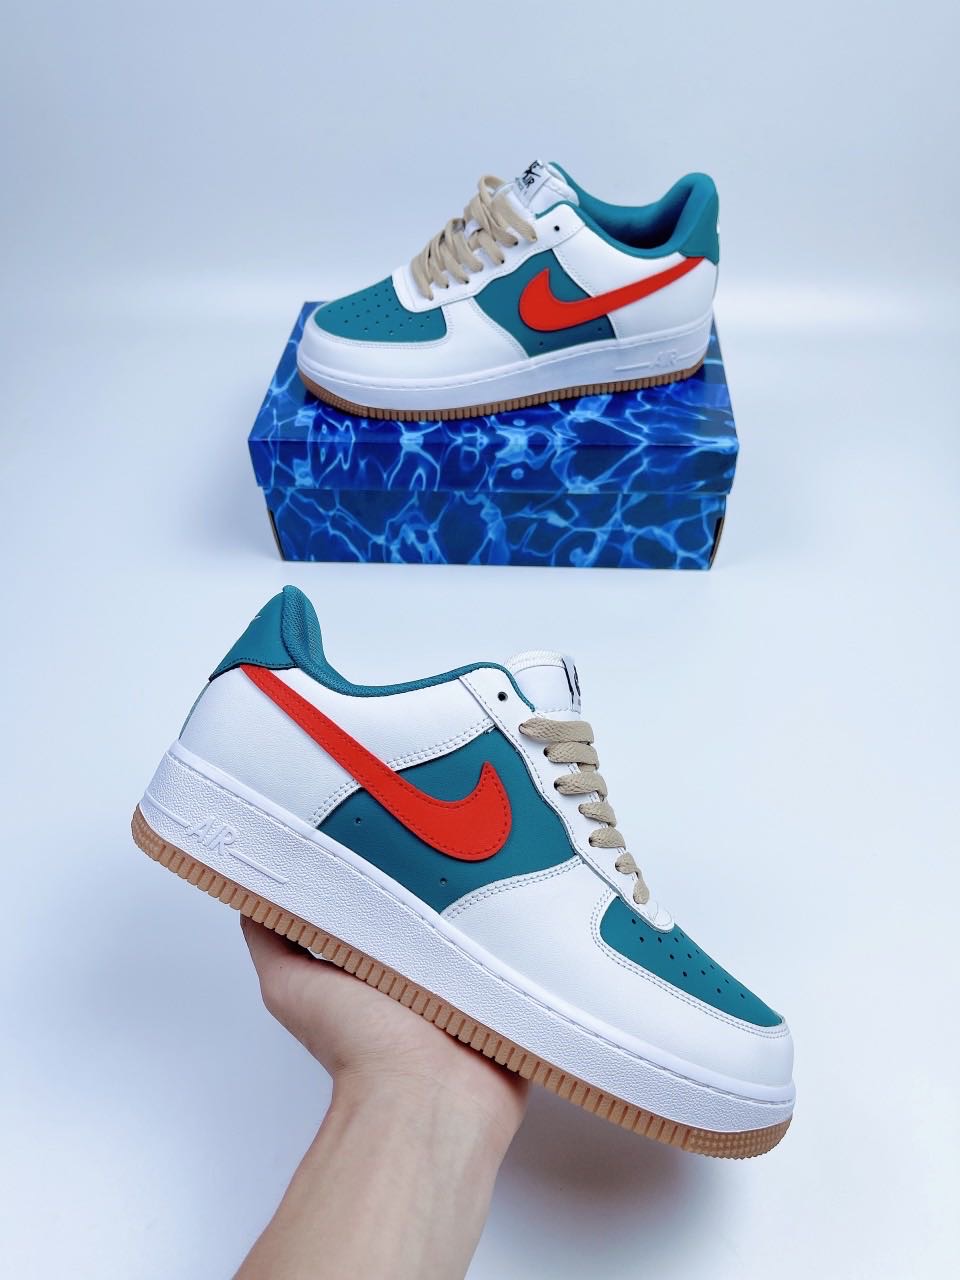 giay af1 gucci rep 11